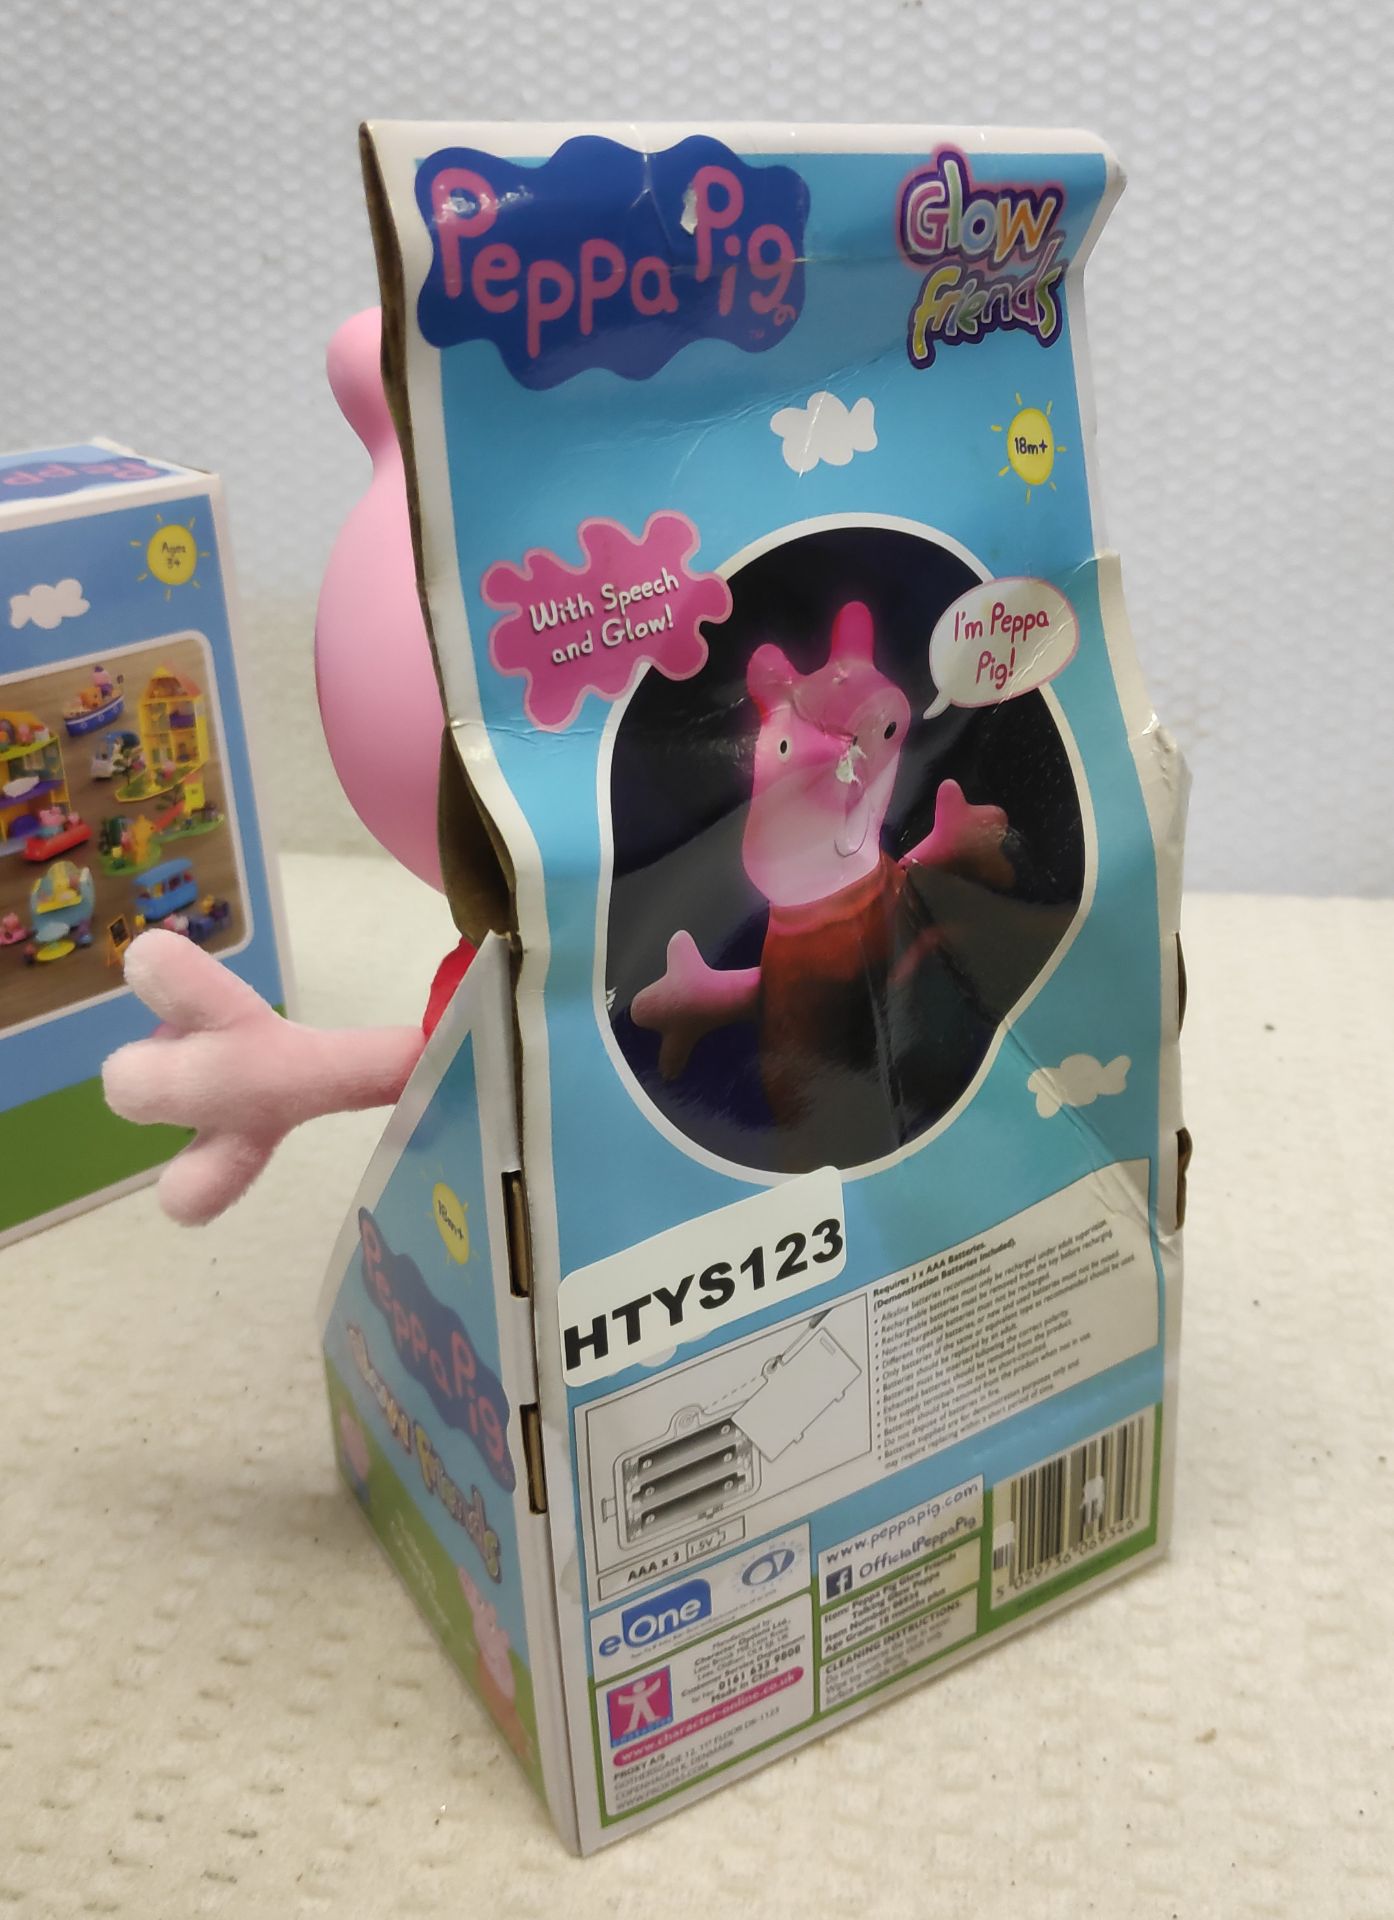 2 x Peppa Pig Toys - Glow Friends Peppa and Air Peppa Jet - New/Boxed - Image 7 of 7